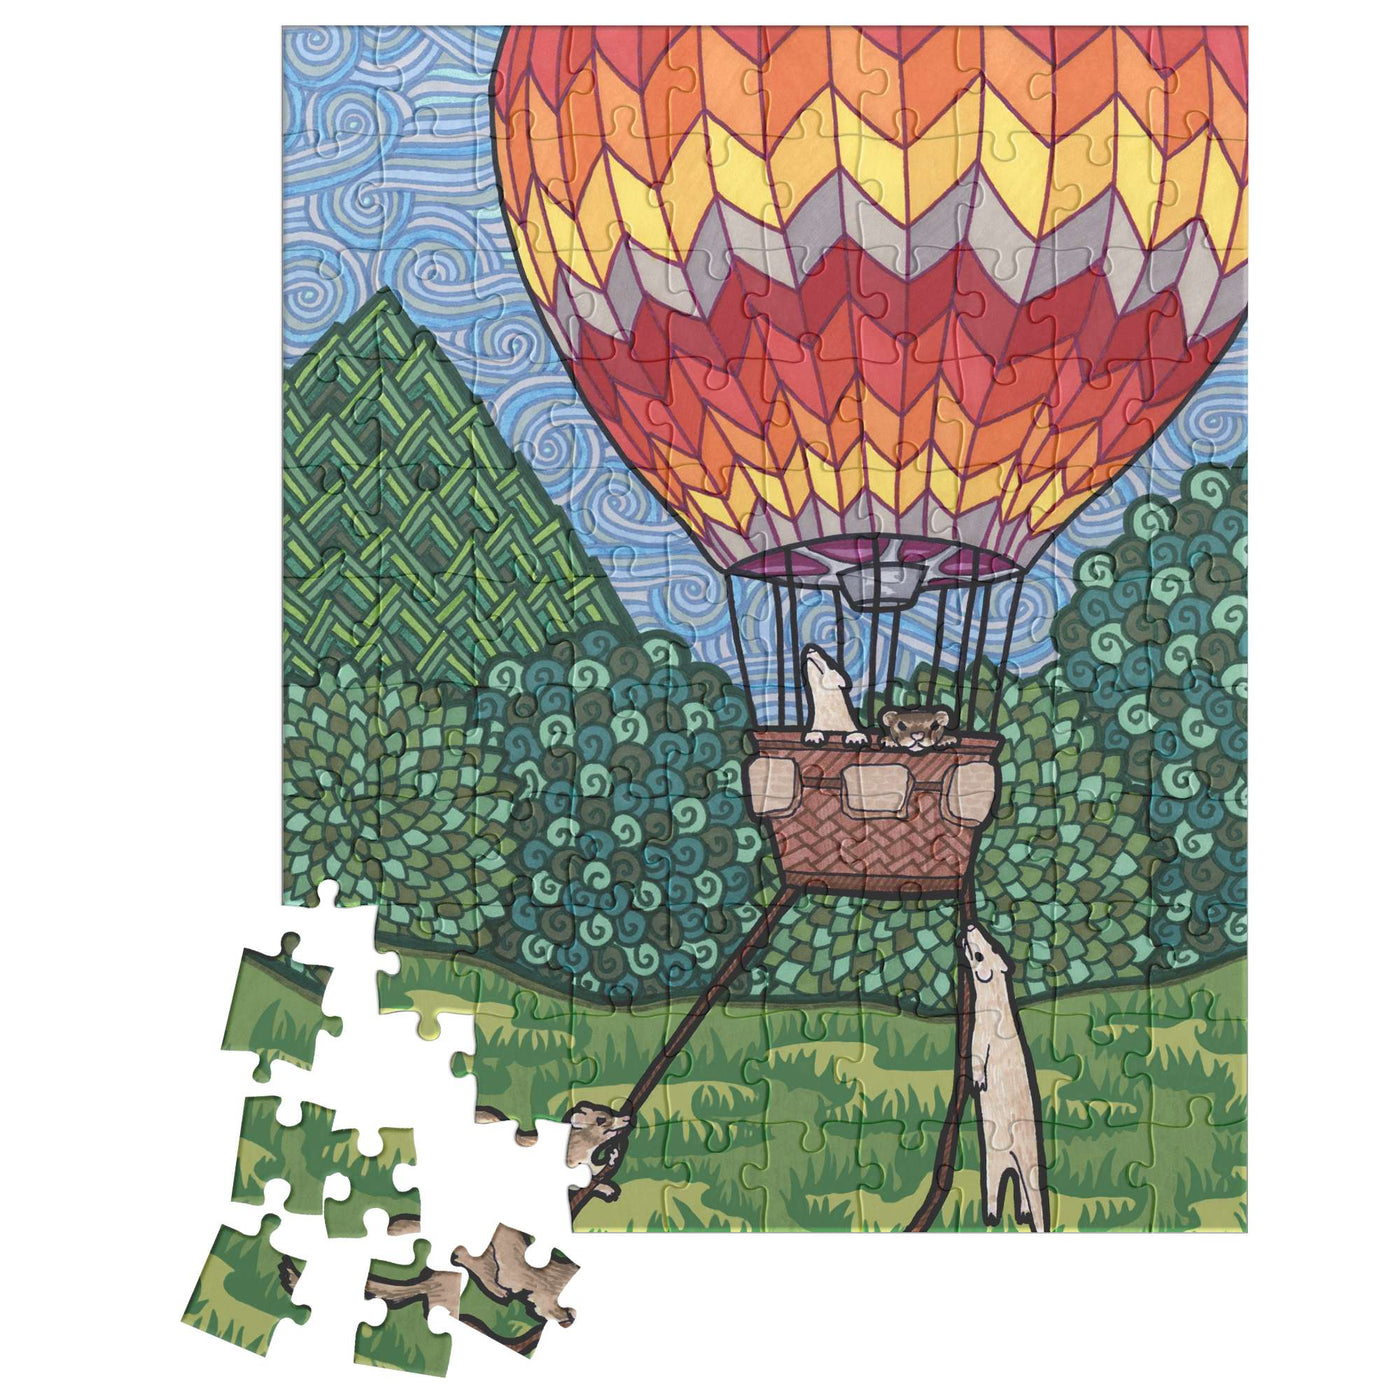 A puzzle of a colorful hot air balloon carrying a basket with ferrets flies above a lush green landscape, with Puzzle pieces in the foreground.